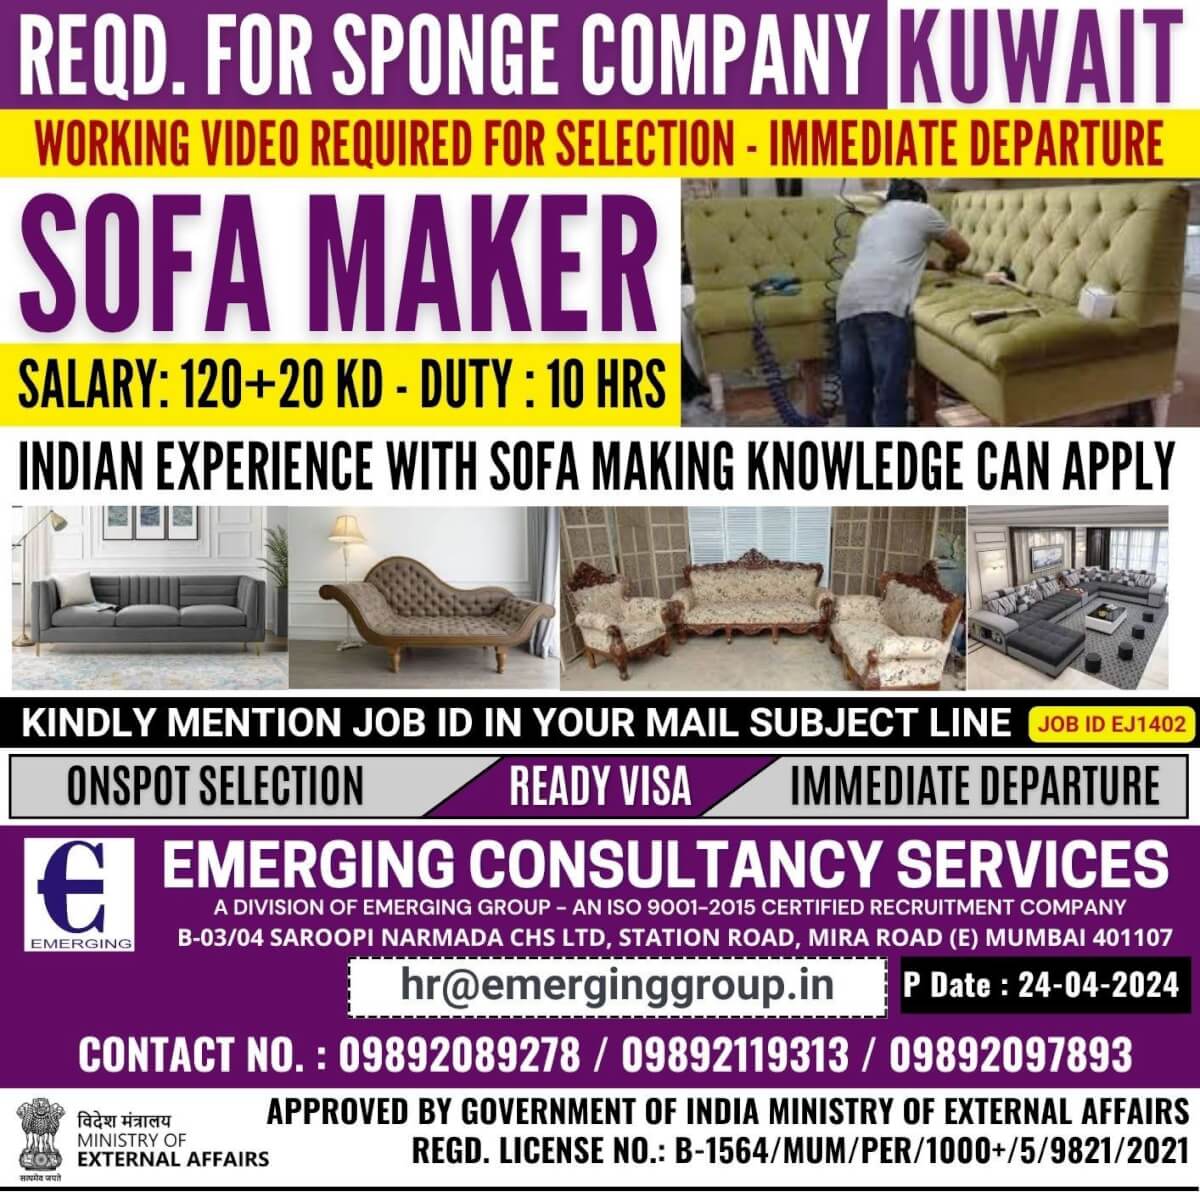 URGENTLY REQUIRED FOR SPONGE COMPANY IN KUWAIT - WORKING VIDEO REQUIRED FOR SELECTION